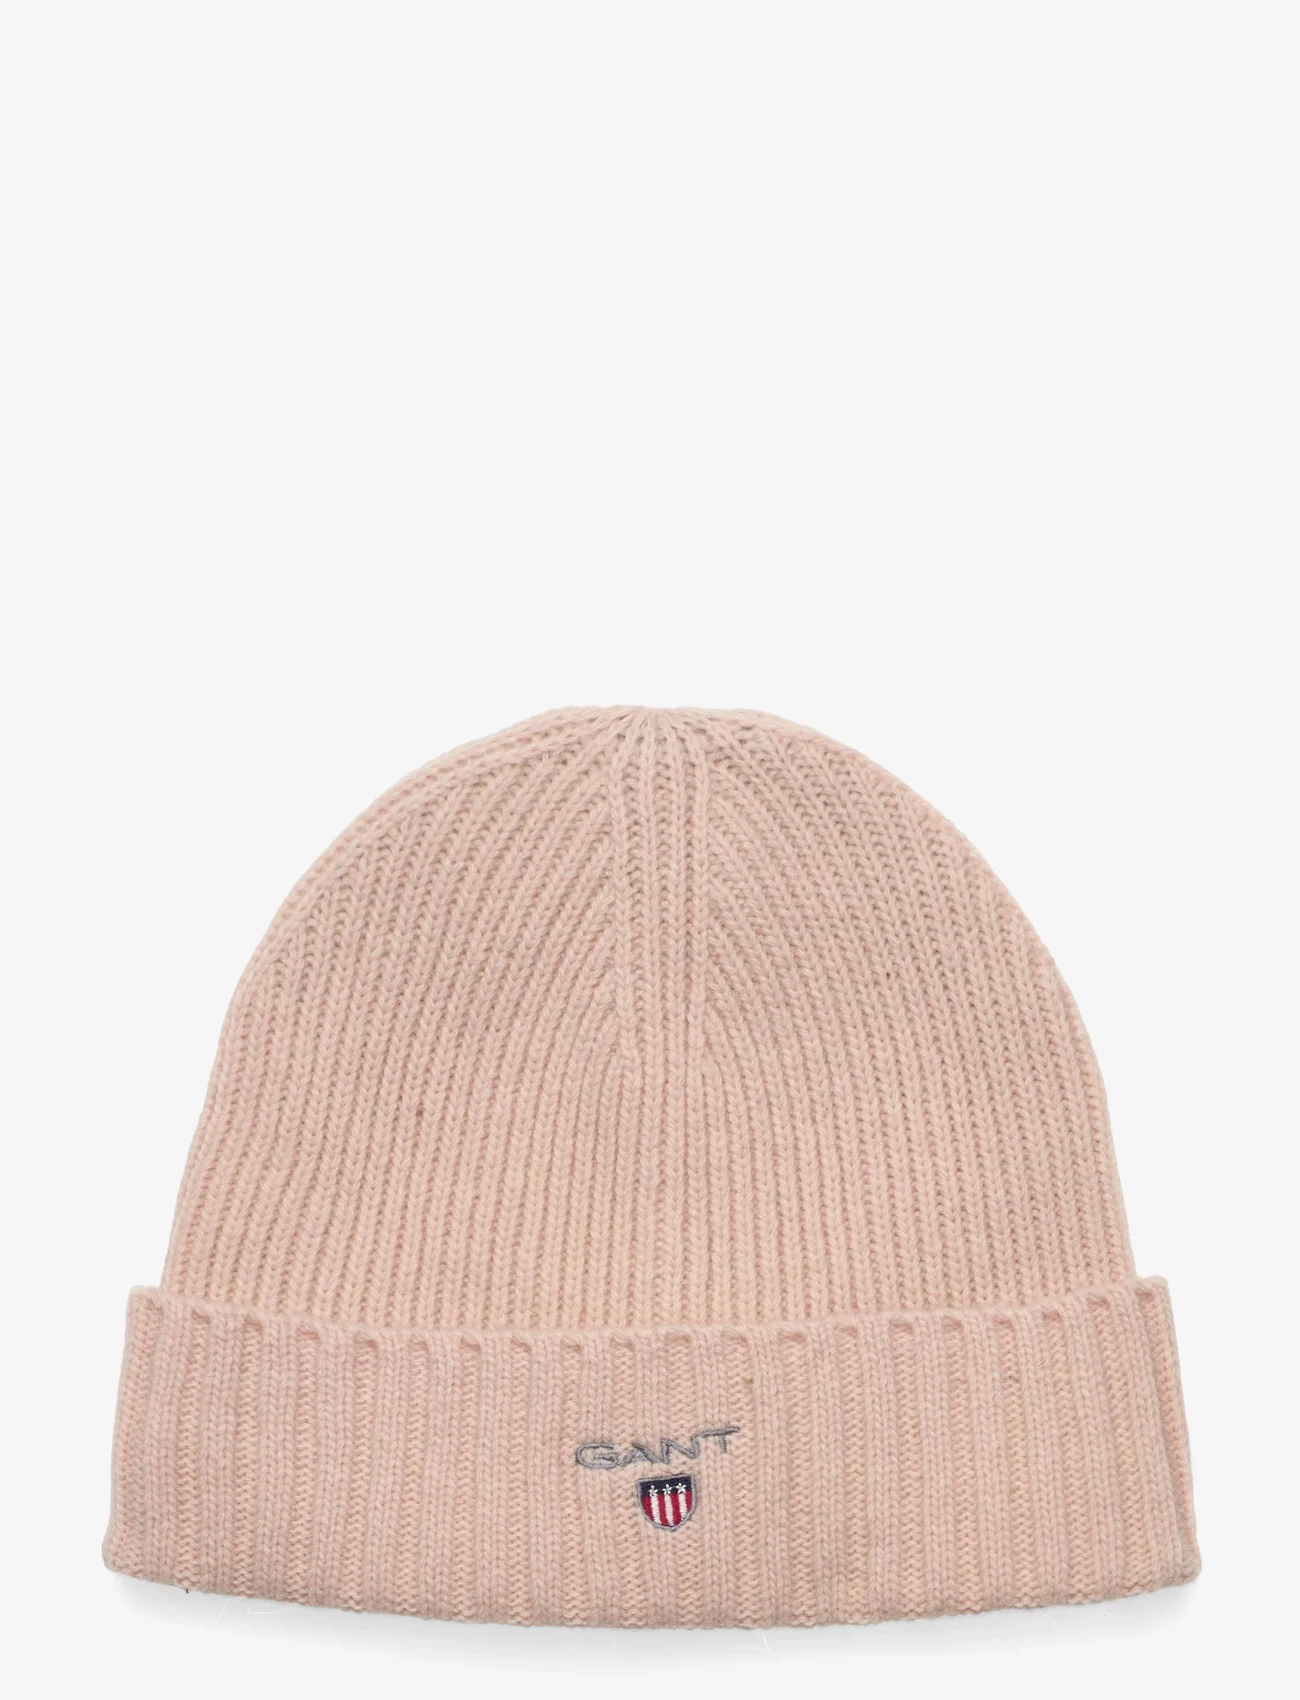 GANT - D1. WOOL LINED BEANIE - silver peony - 0